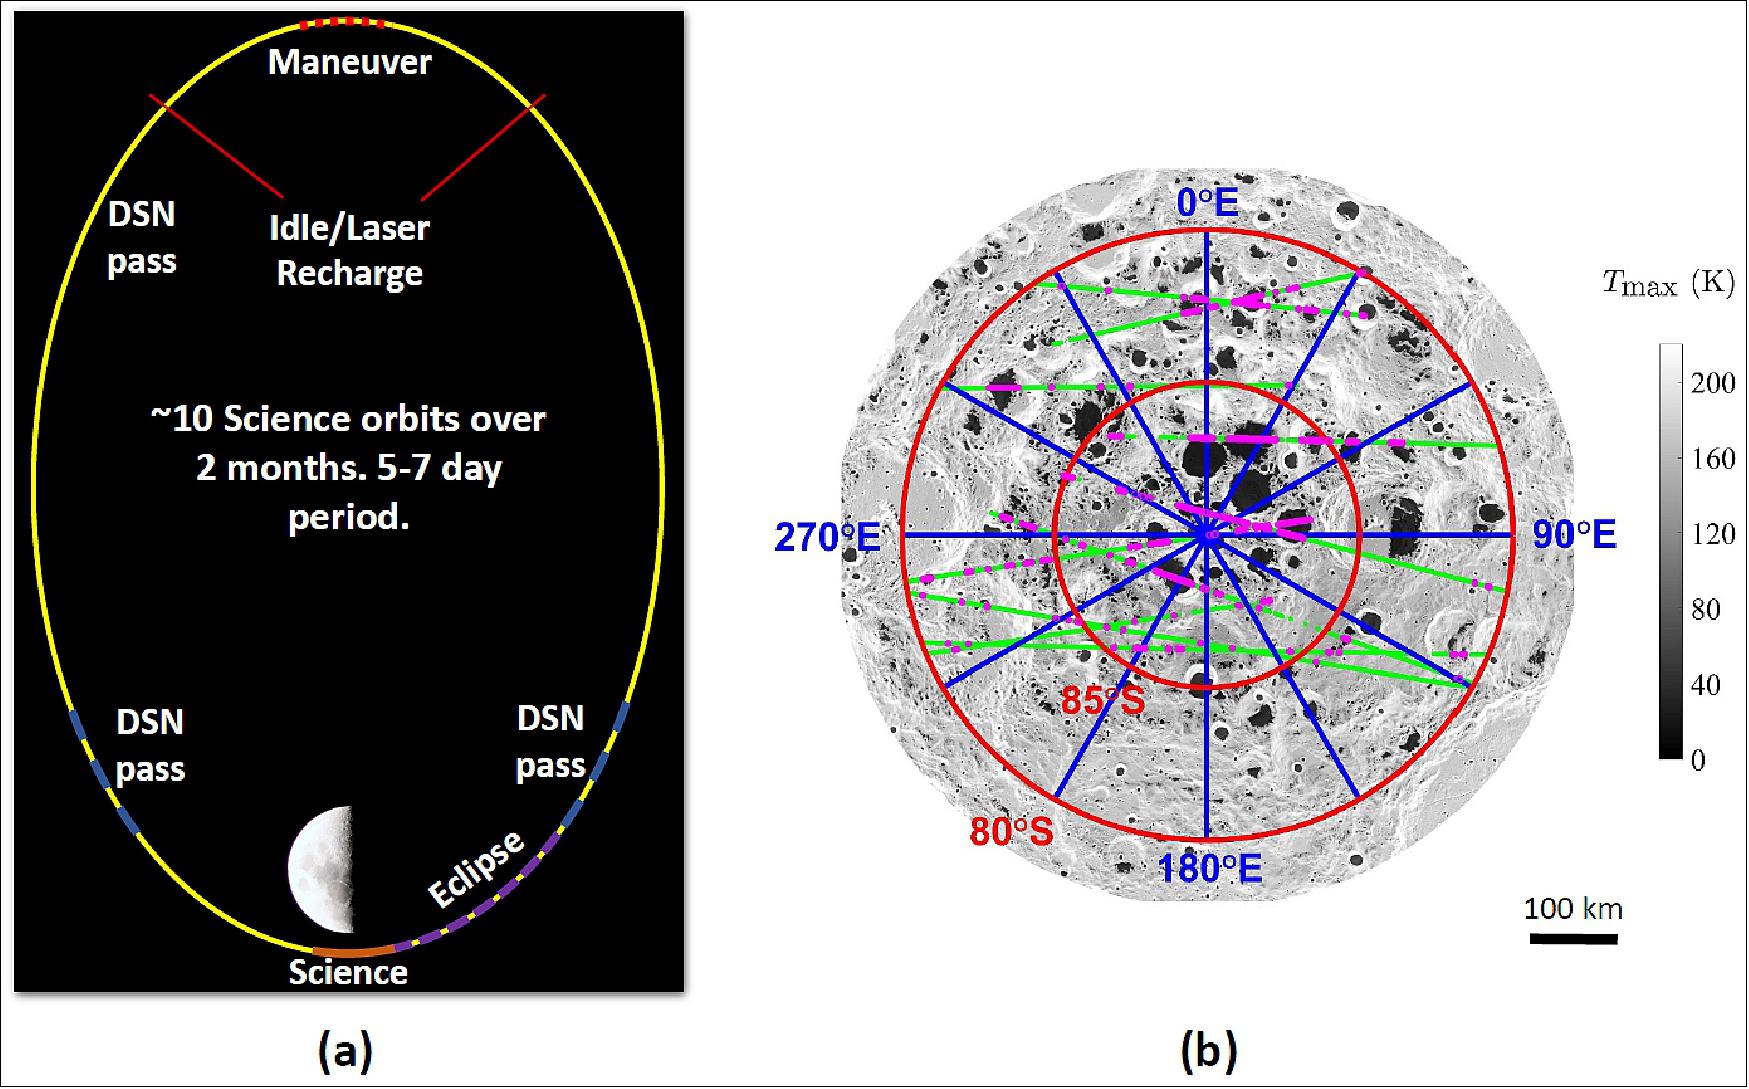 Figure 5: Mission design: (a) Proposed LF lunar orbit (not to scale; DSN: deep space network) 11); (b) LF spacecraft science data paths on the lunar South Pole. The gray scale shows the maximum temperature; the green and pink segments are the science paths, with the pink dots indicating the PSRs (Permanently Shadowed Regions). The total duration of the science data paths is equal to approximately 39 minutes, with approximately 5 minutes corresponding to measurements over PSRs (image credit: LF collaboration)